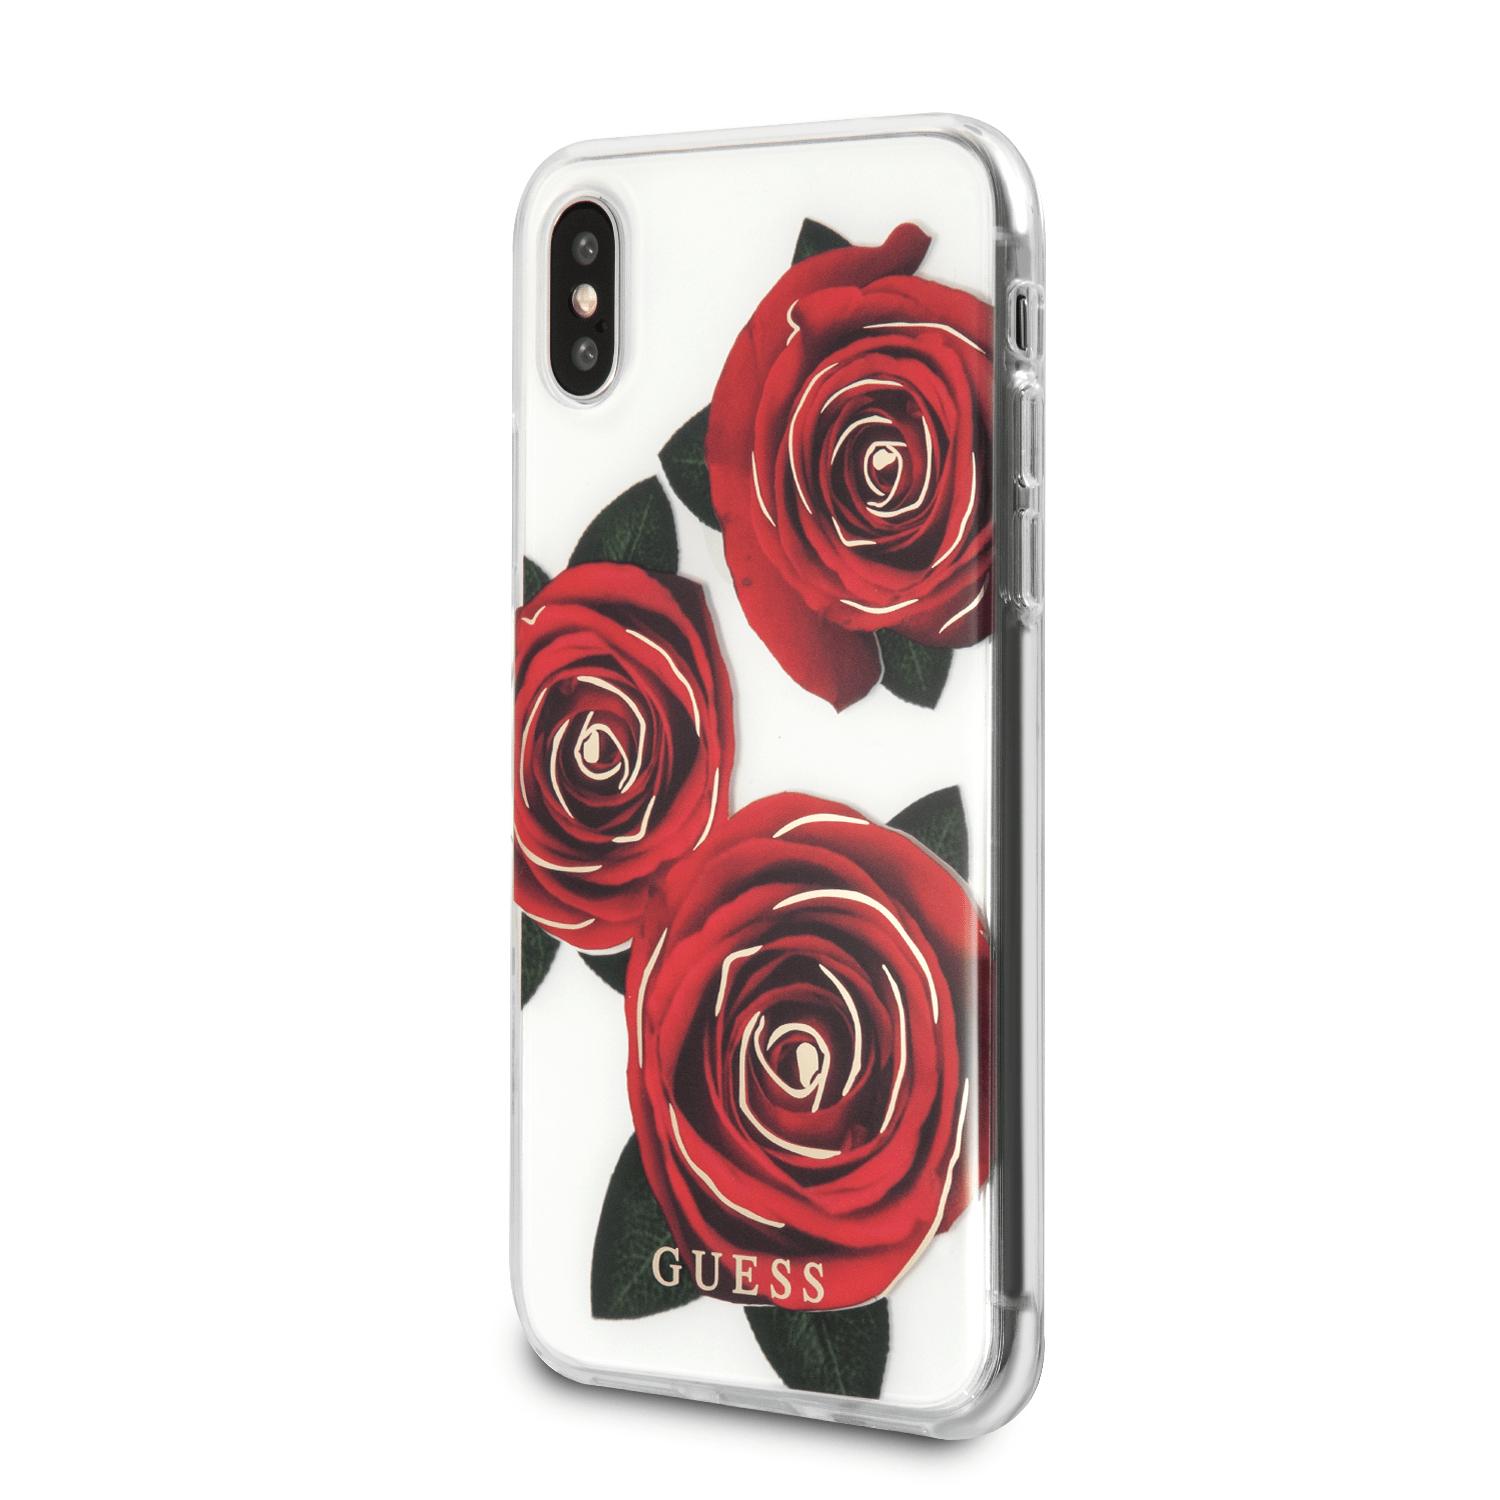 Explore the GUESS iPhone X cell phone case for style and protection.